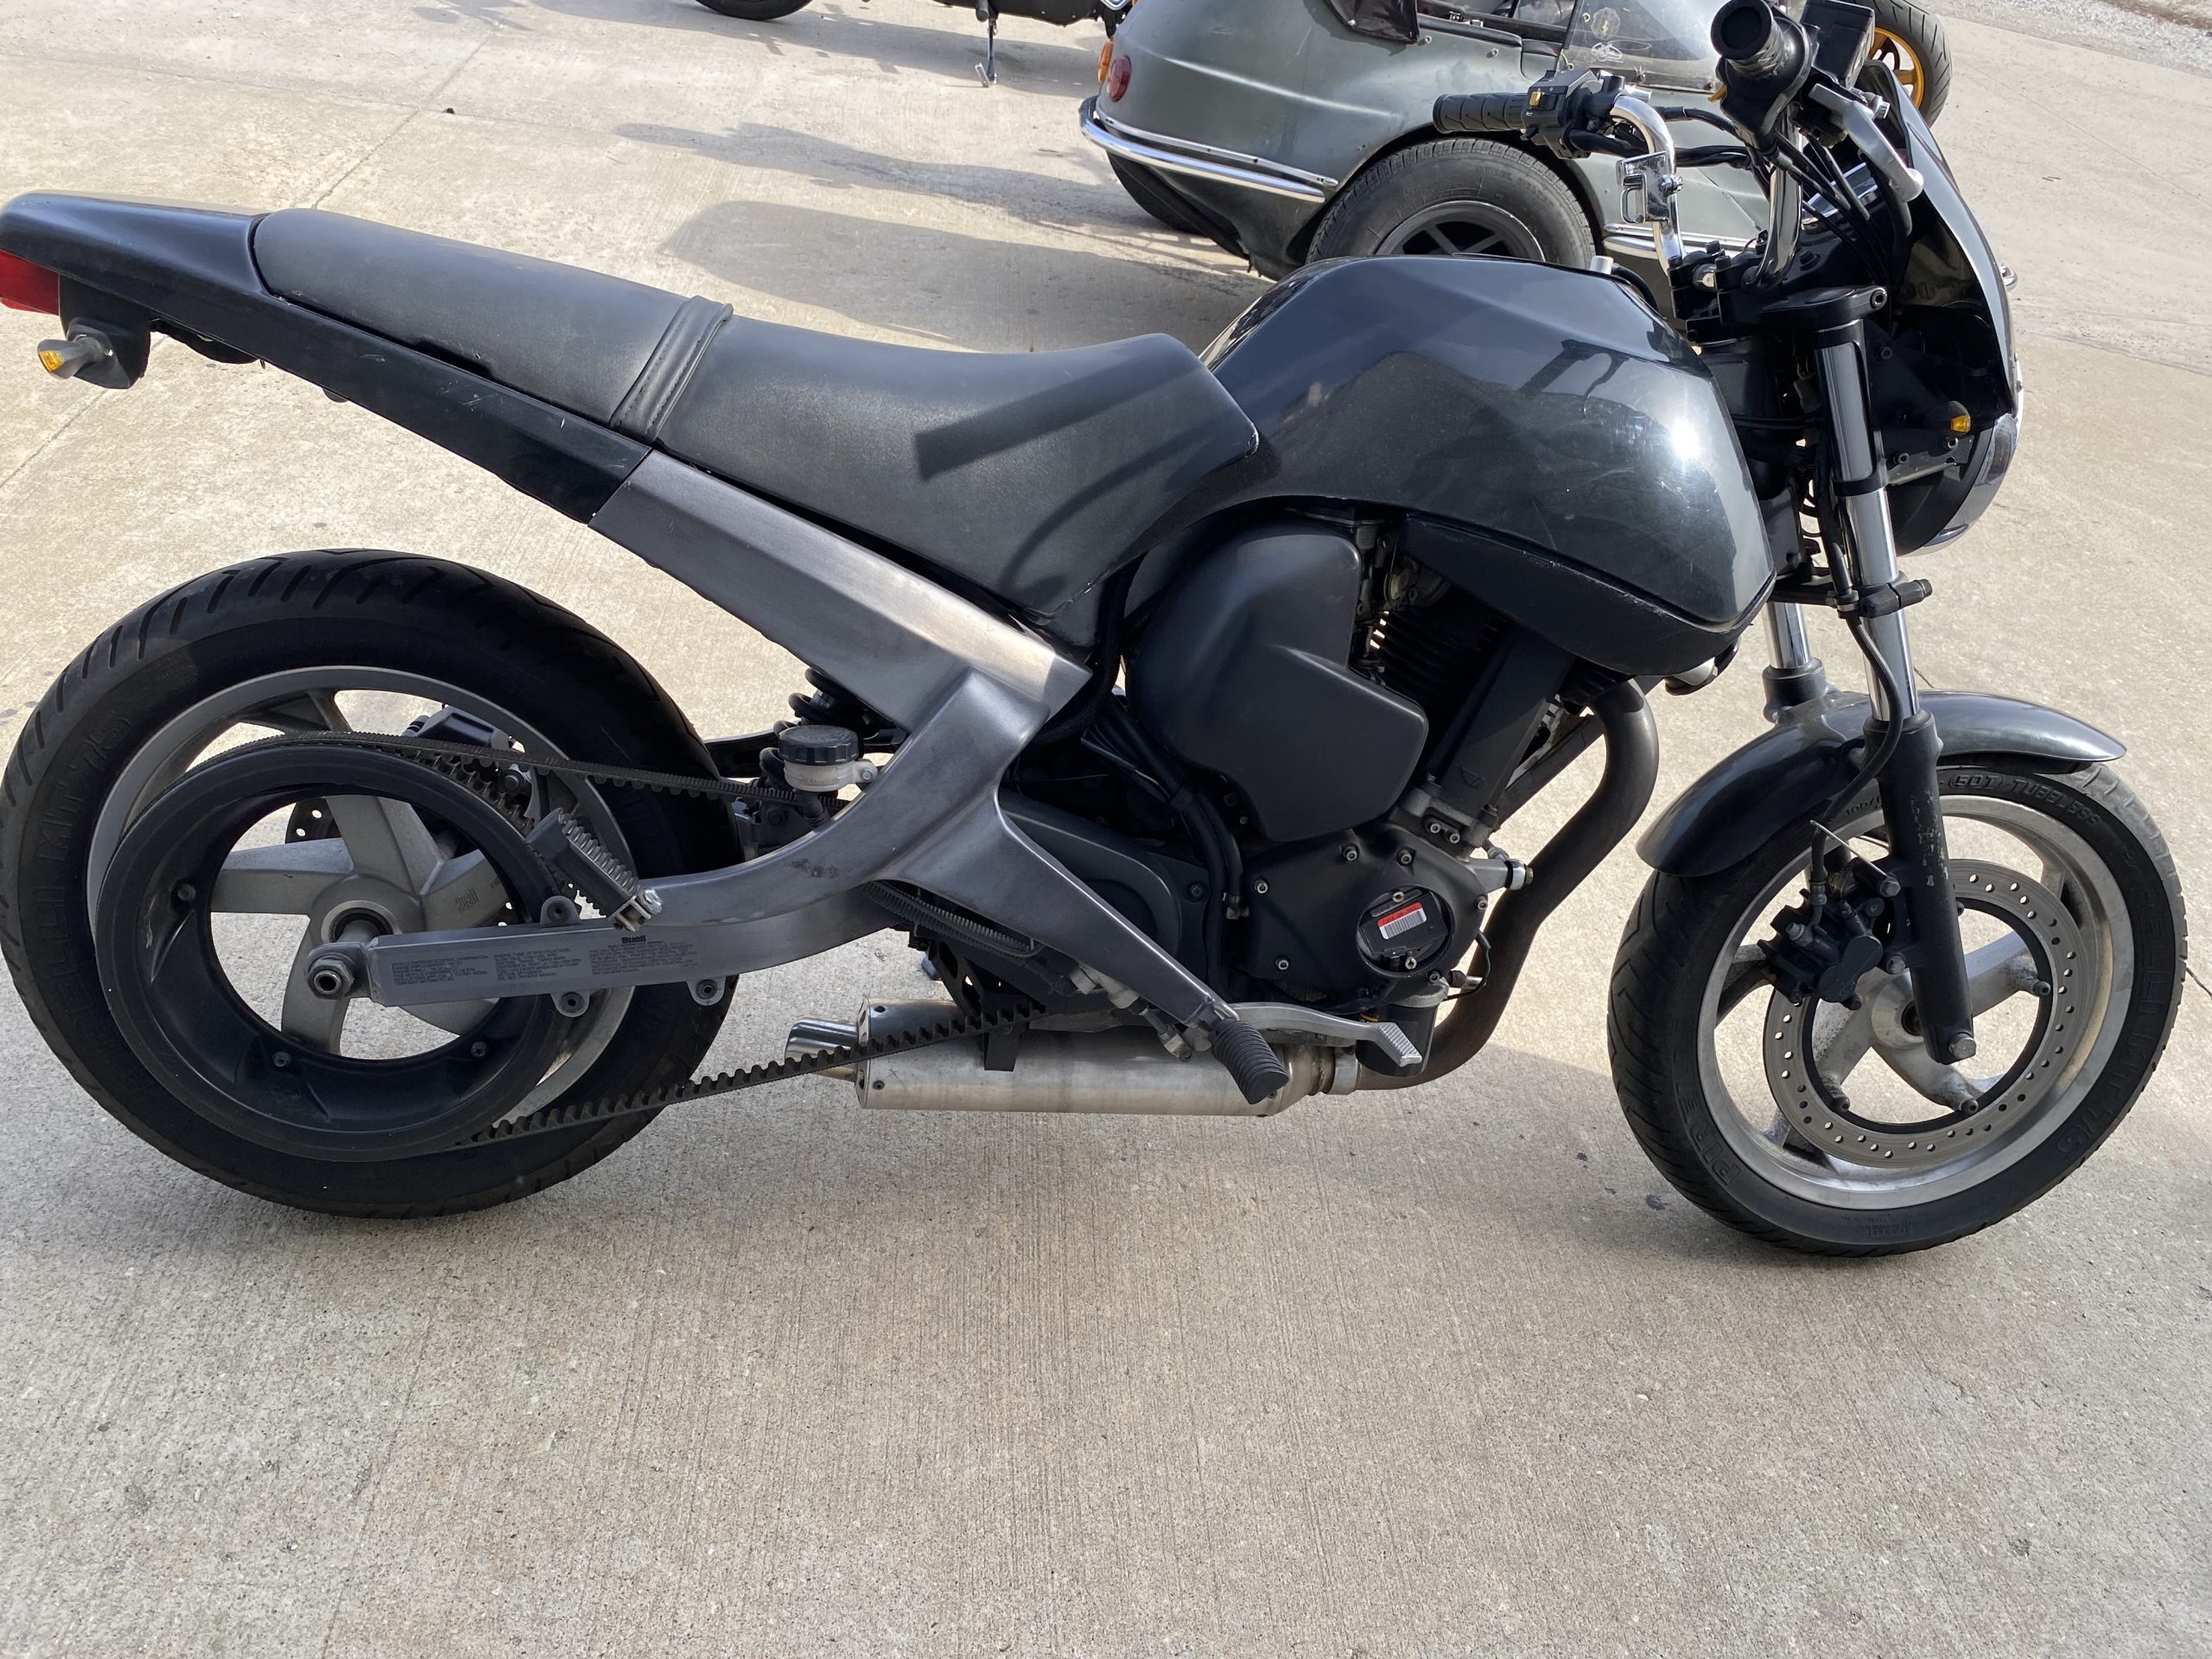 2001 Buell Blast, Rare Find: 2001 Buell Blast for Sale at Knobtown Cycle &#8211; Only $2500!, Knobtown Cycle